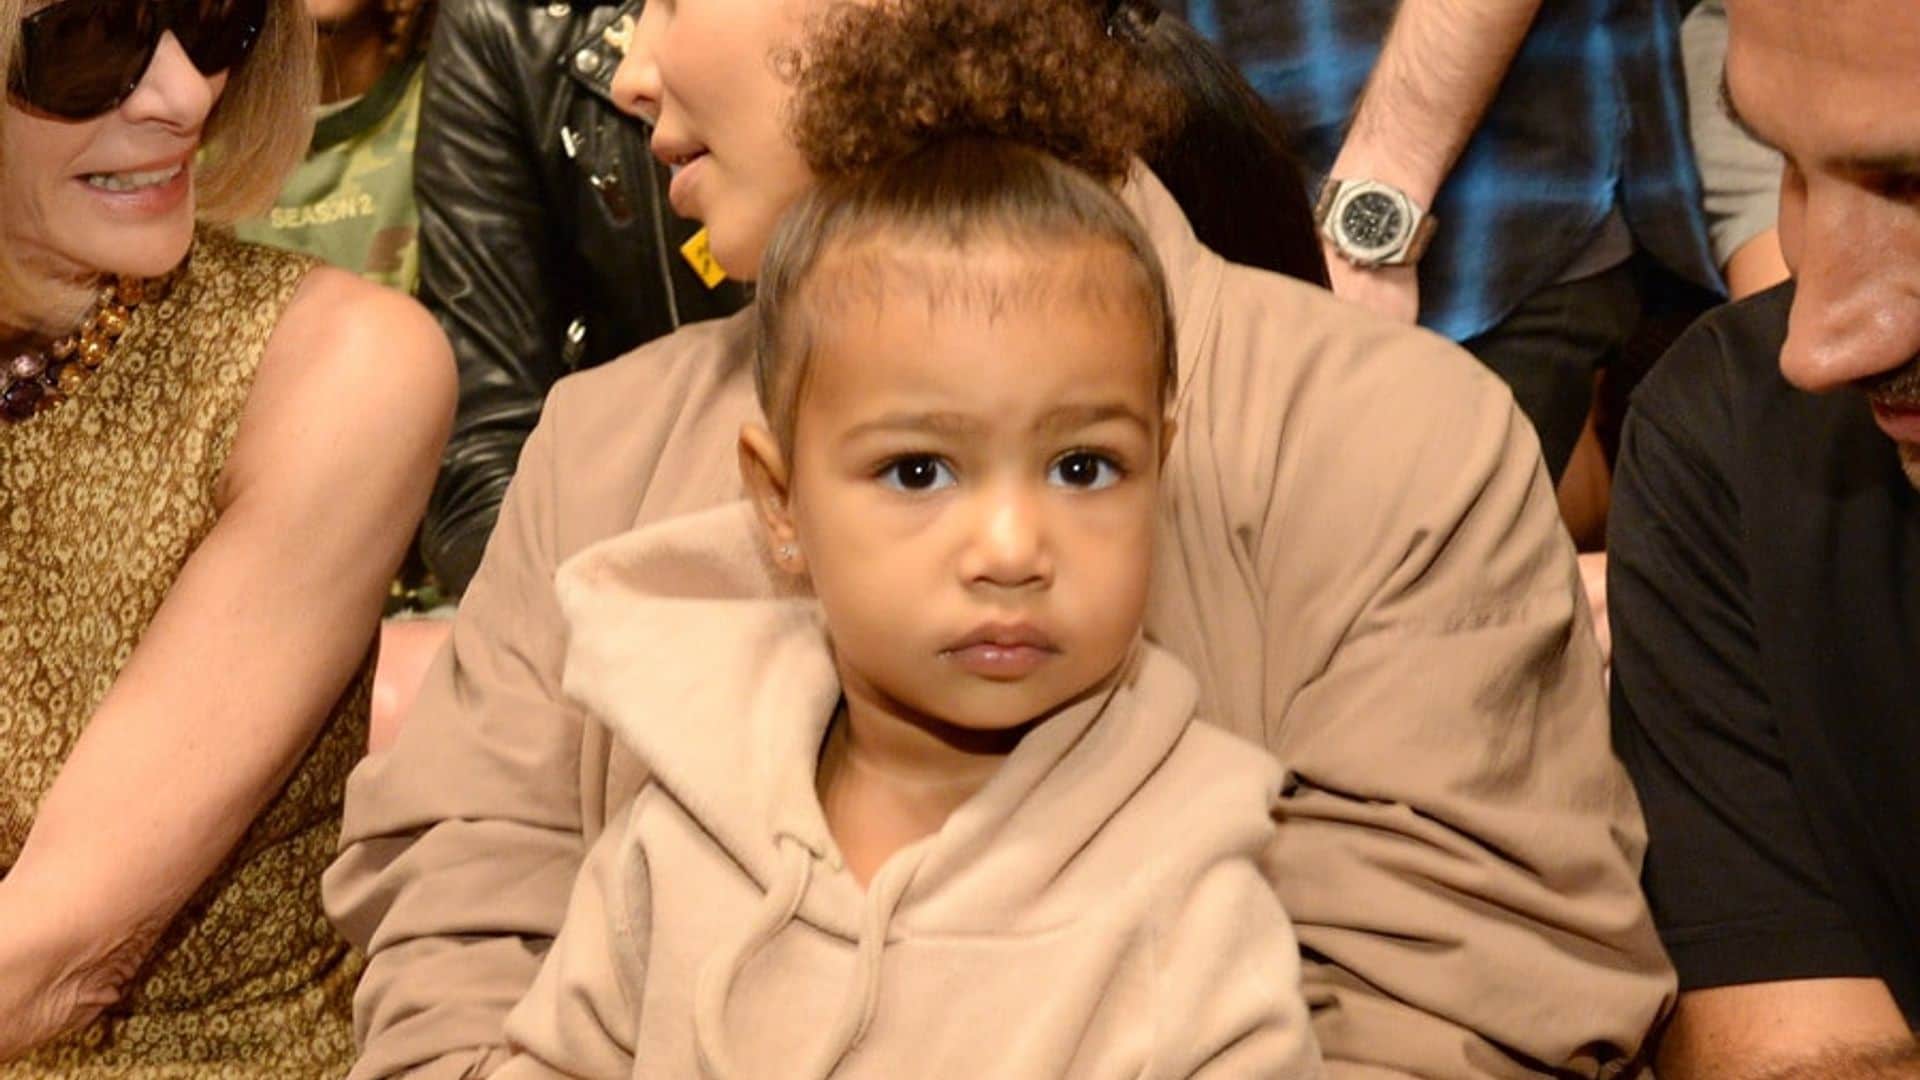 Kim Kardashian and Kanye West's daughter North is a model and designer